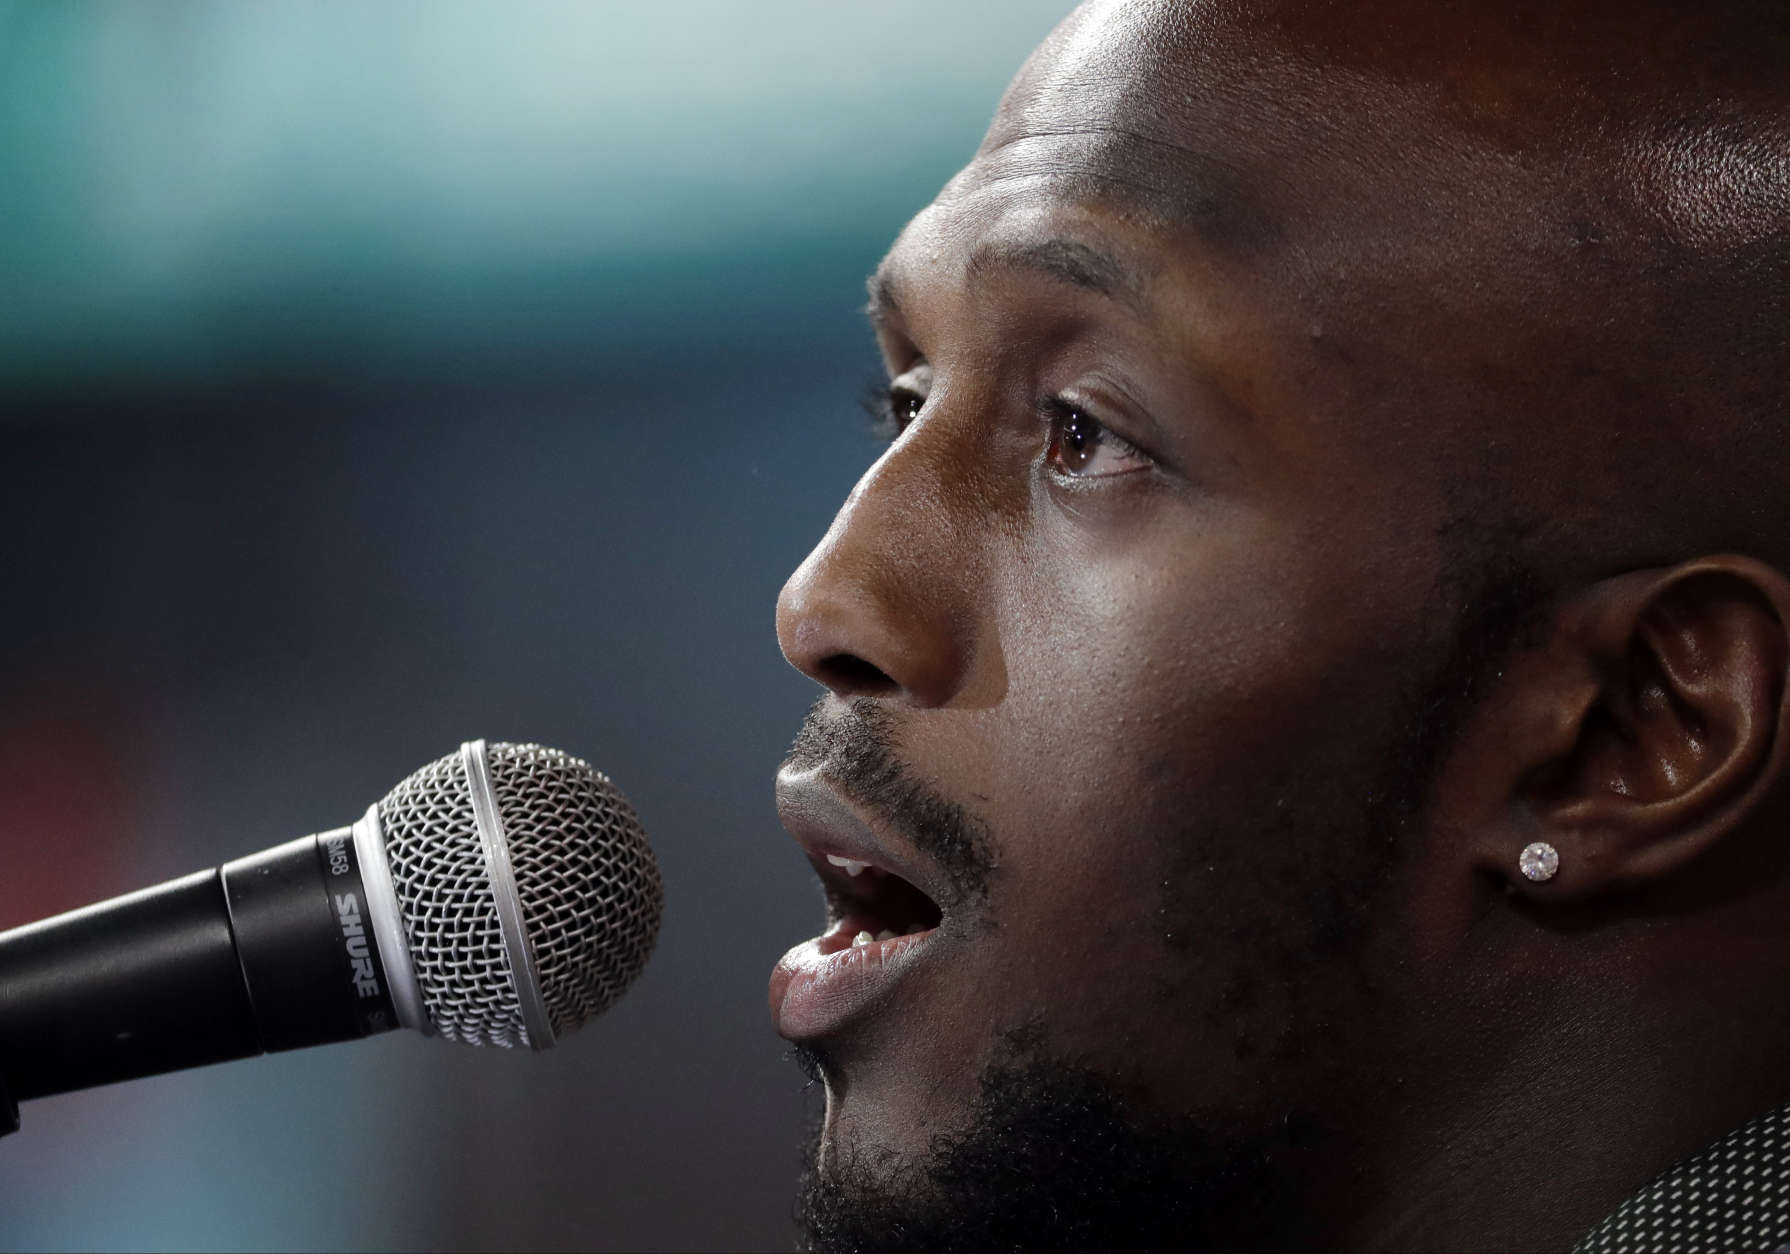 New England Patriots' Devin McCourty answers questions during opening night for the NFL Super Bowl 51 football game at Minute Maid Park Monday, Jan. 30, 2017, in Houston. (AP Photo/Charlie Riedel)